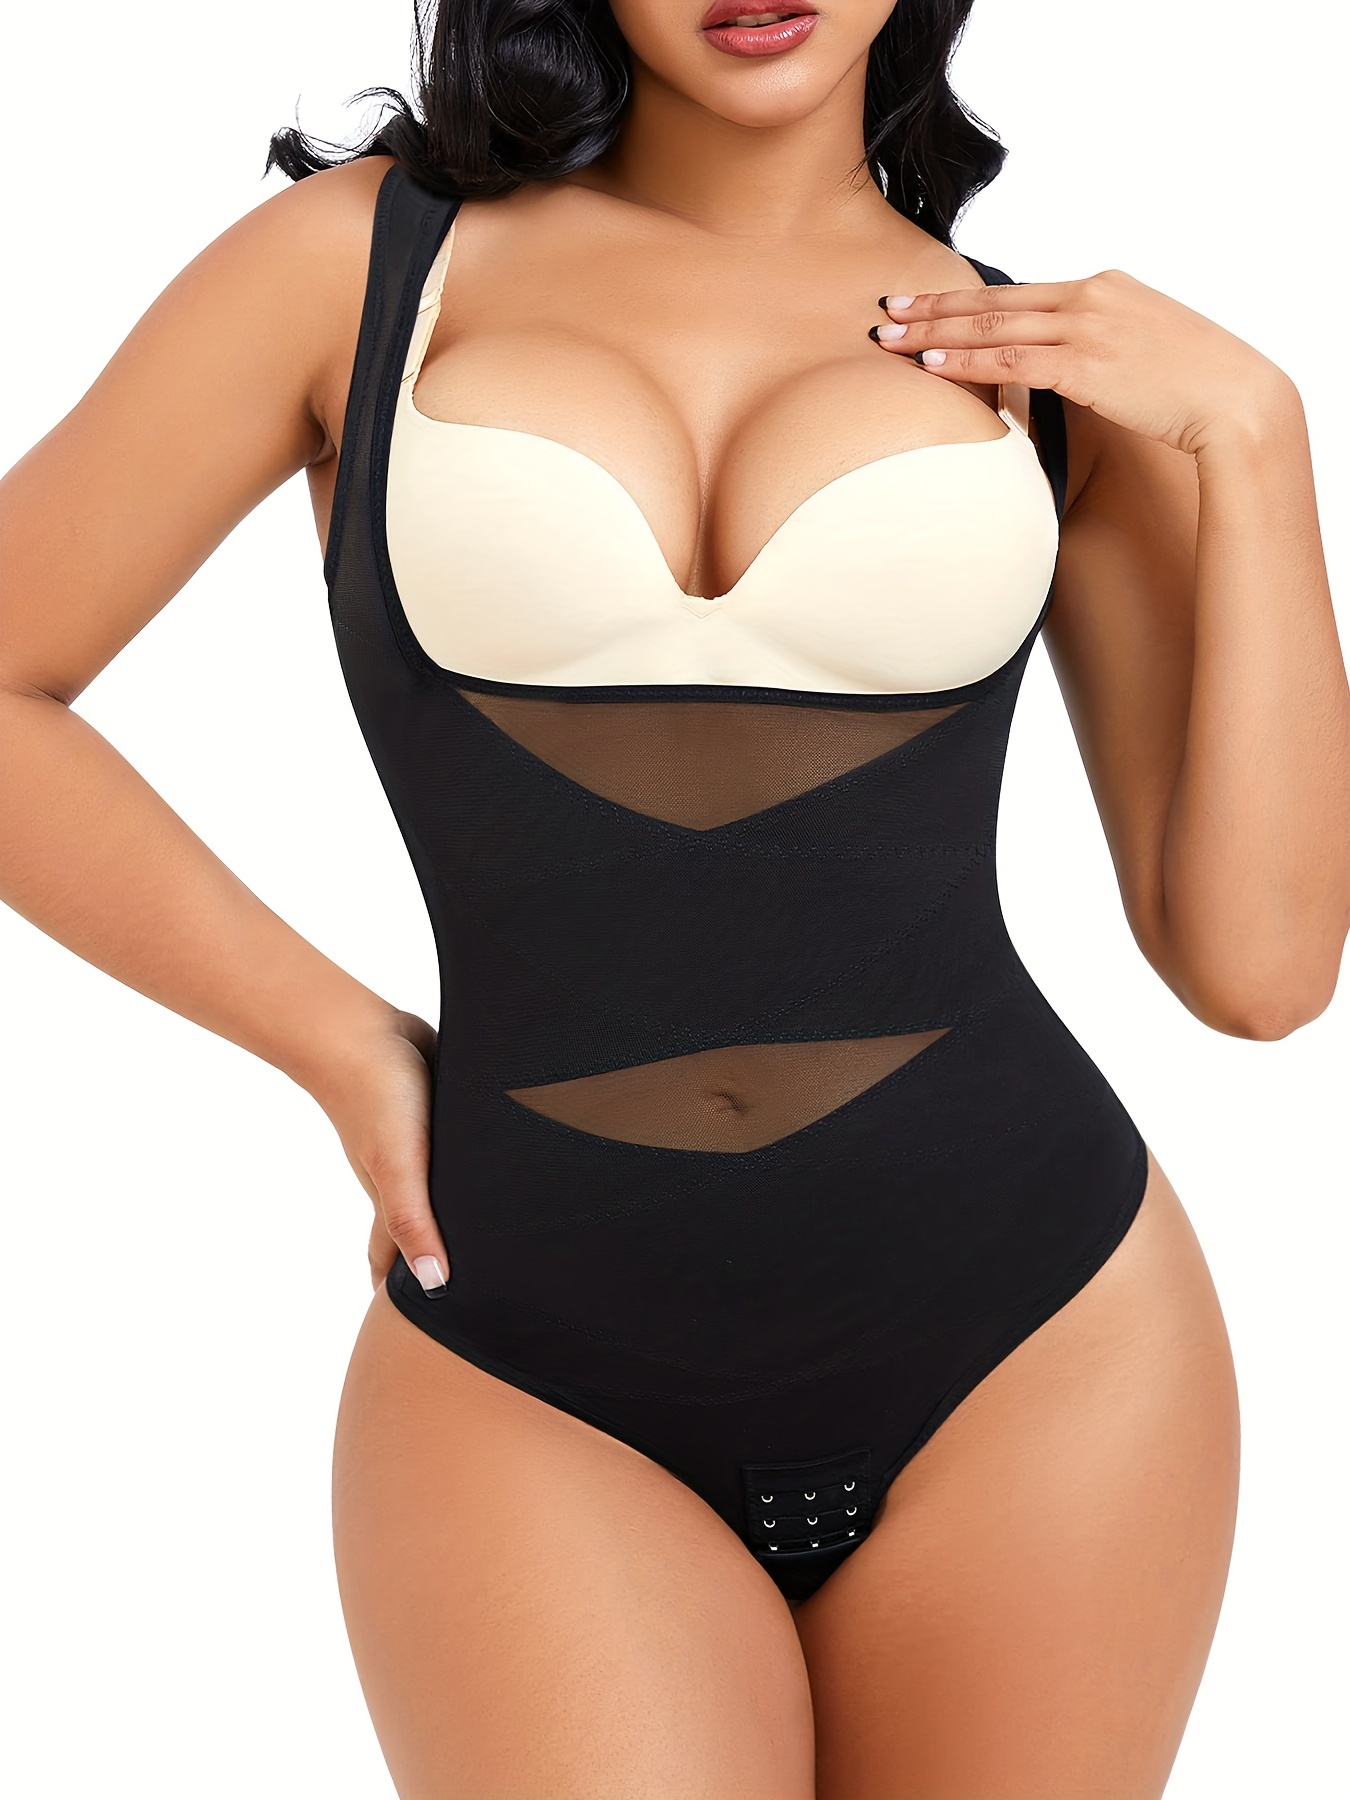  Full Body Shaper for Women Crotchless Butt Lifter Post Surgical  Shapewear Postpartum Fajas Colombianas Thigh Slimmer Black : Sports &  Outdoors